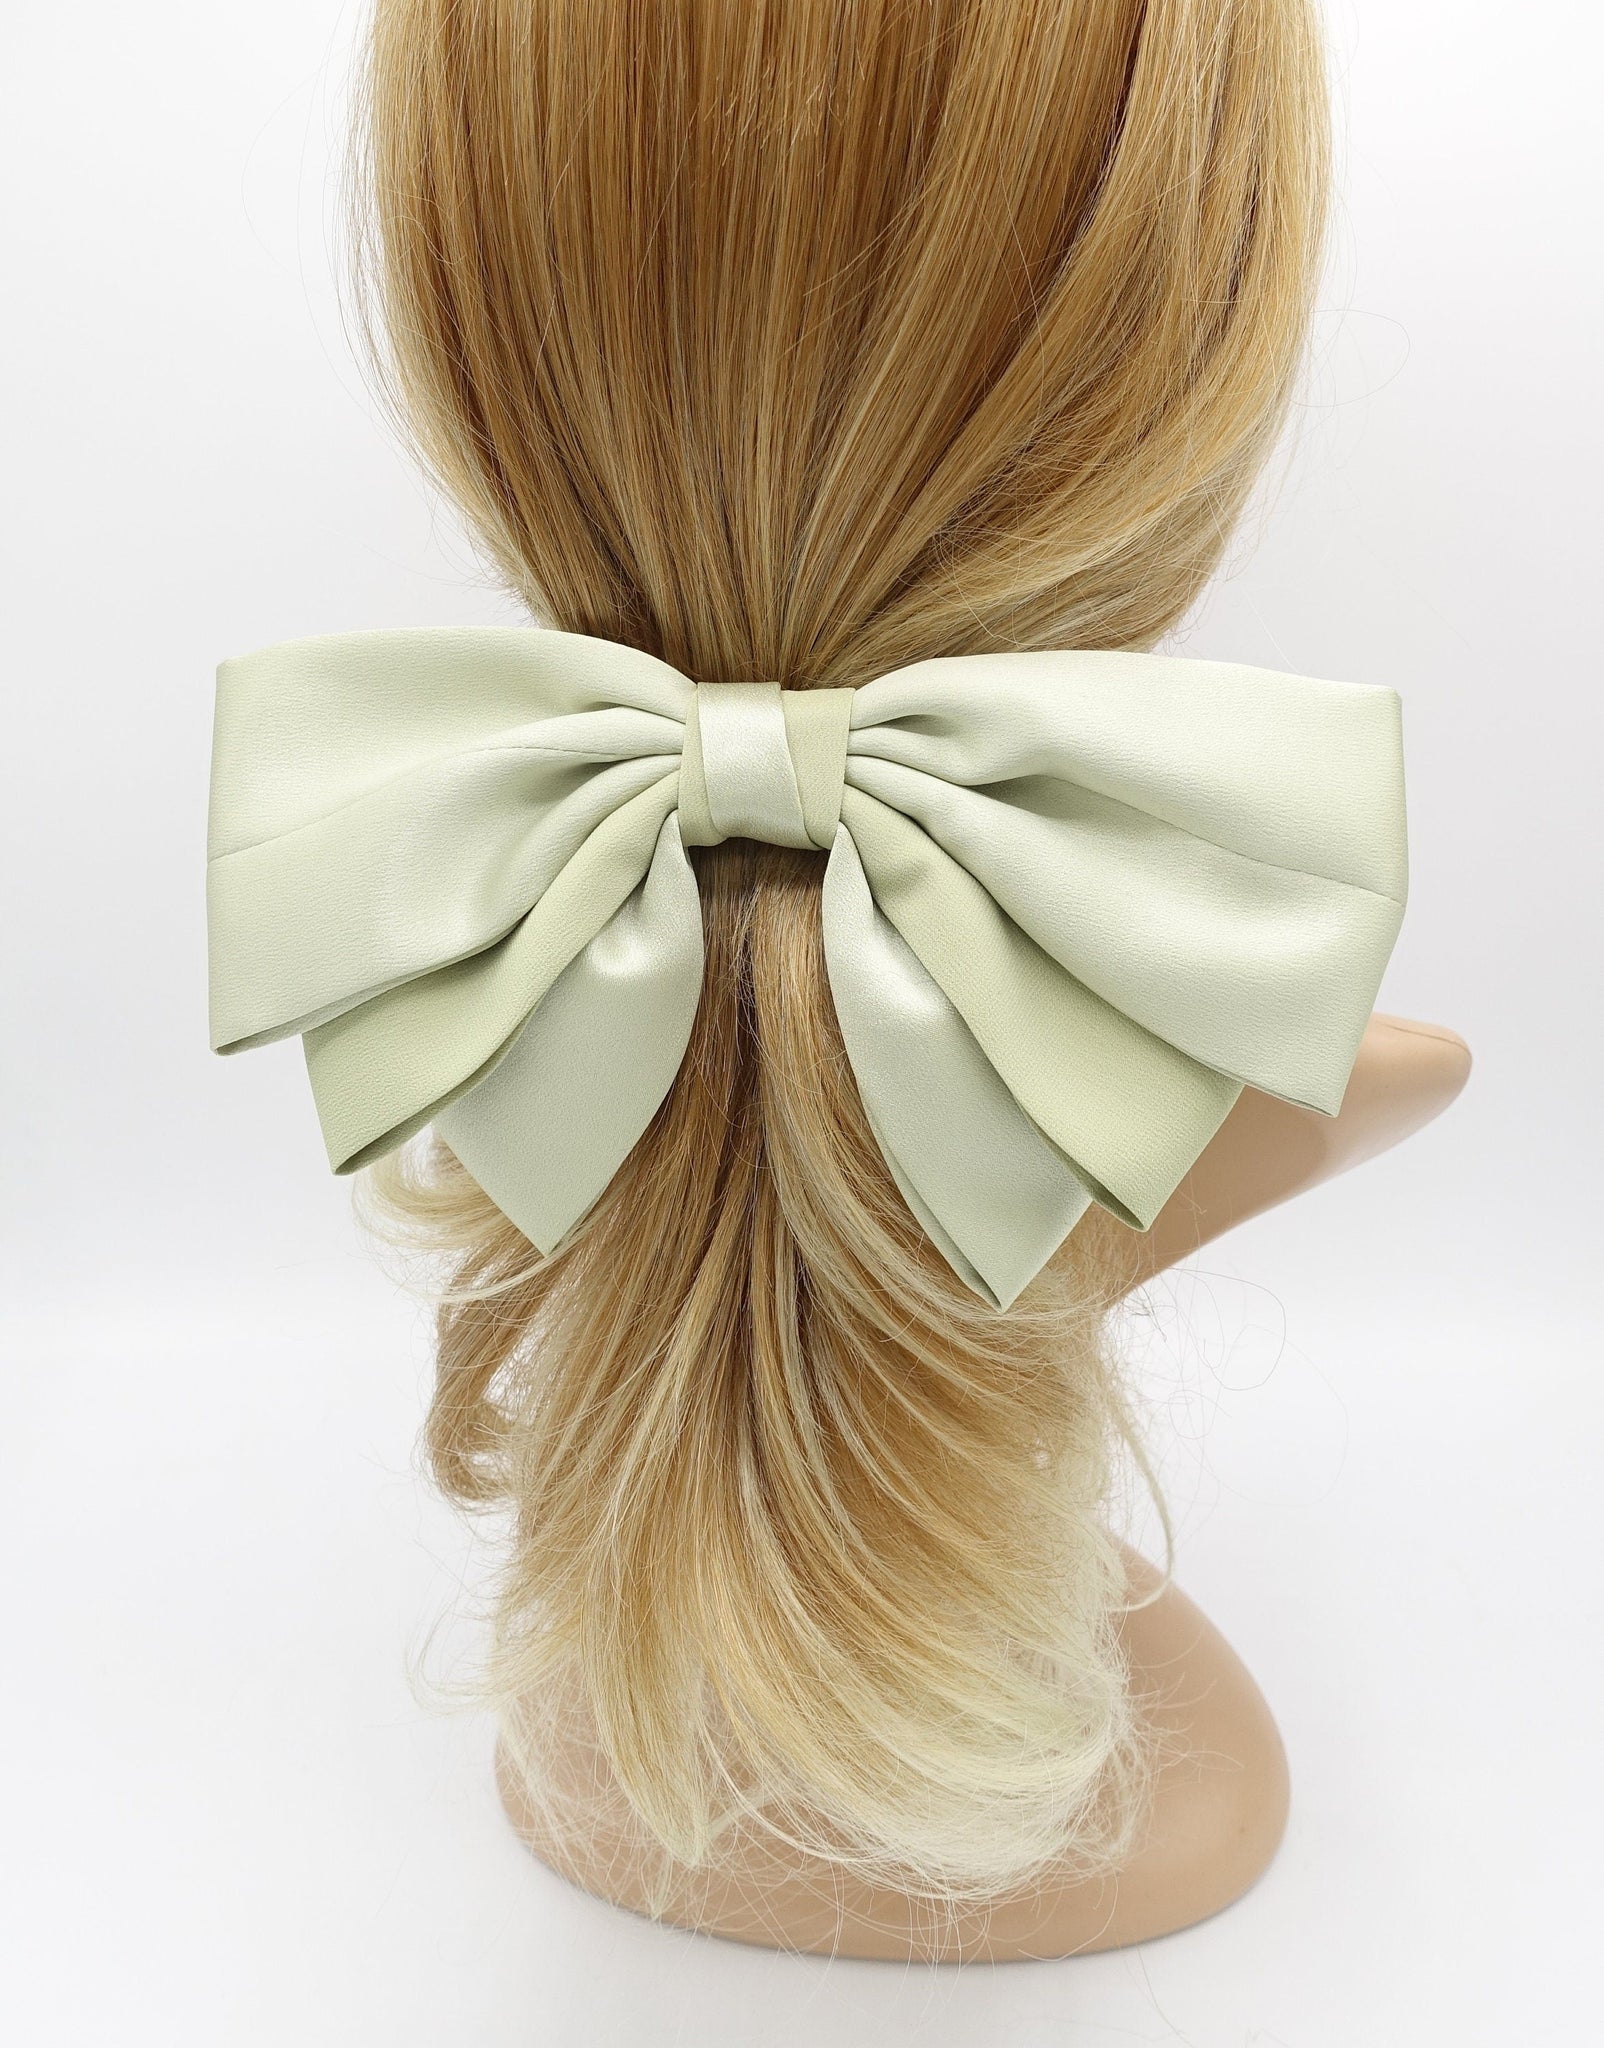 veryshine.com Barrette (Bow) Sage satin hair bow 2 tone double layered hair accessory for women